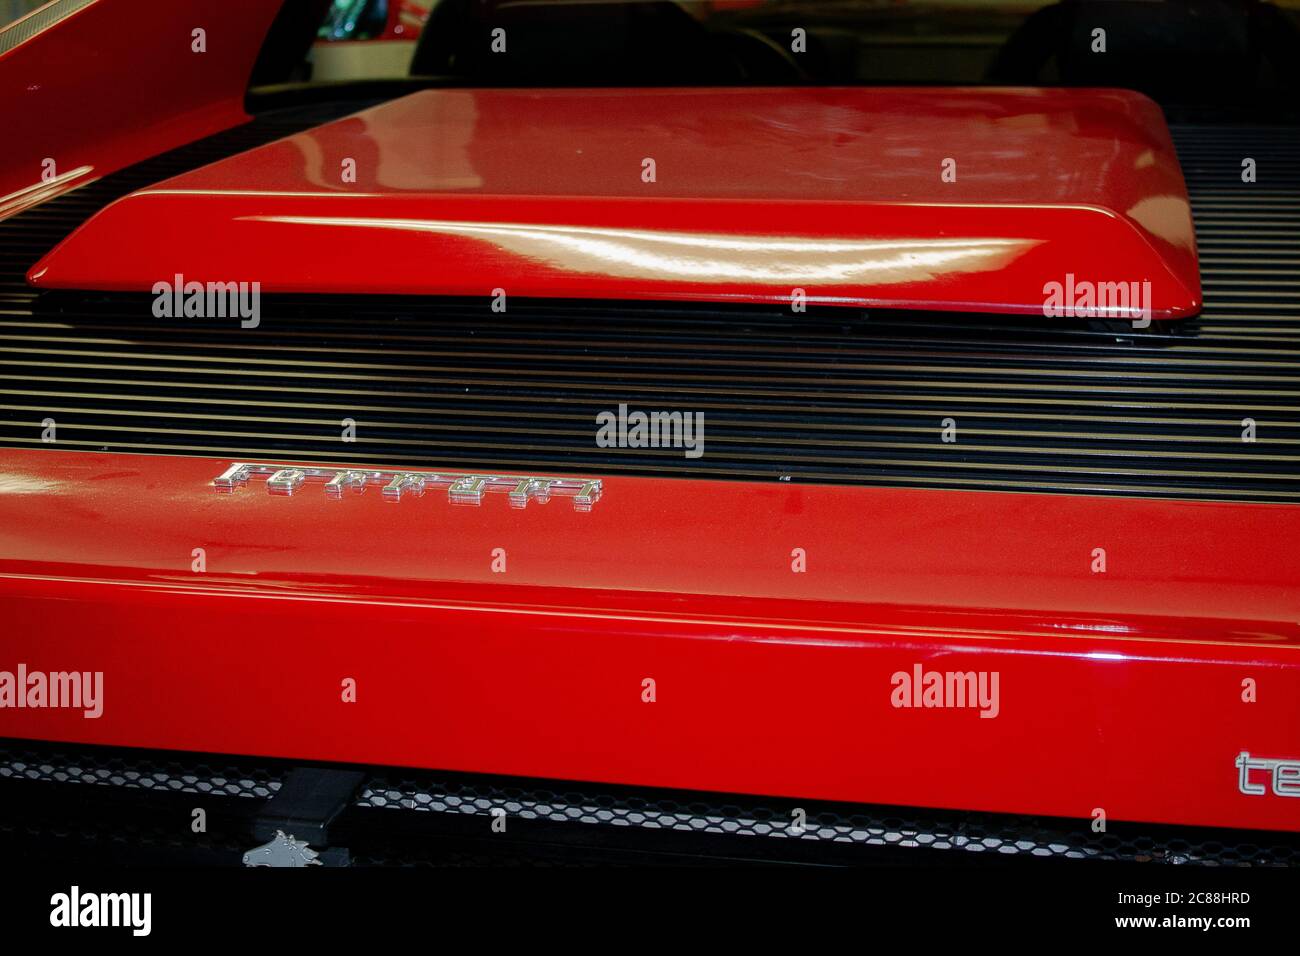 An engine compartment cover from a red super sports car from Italy. Ferrari Testarossa. Stock Photo